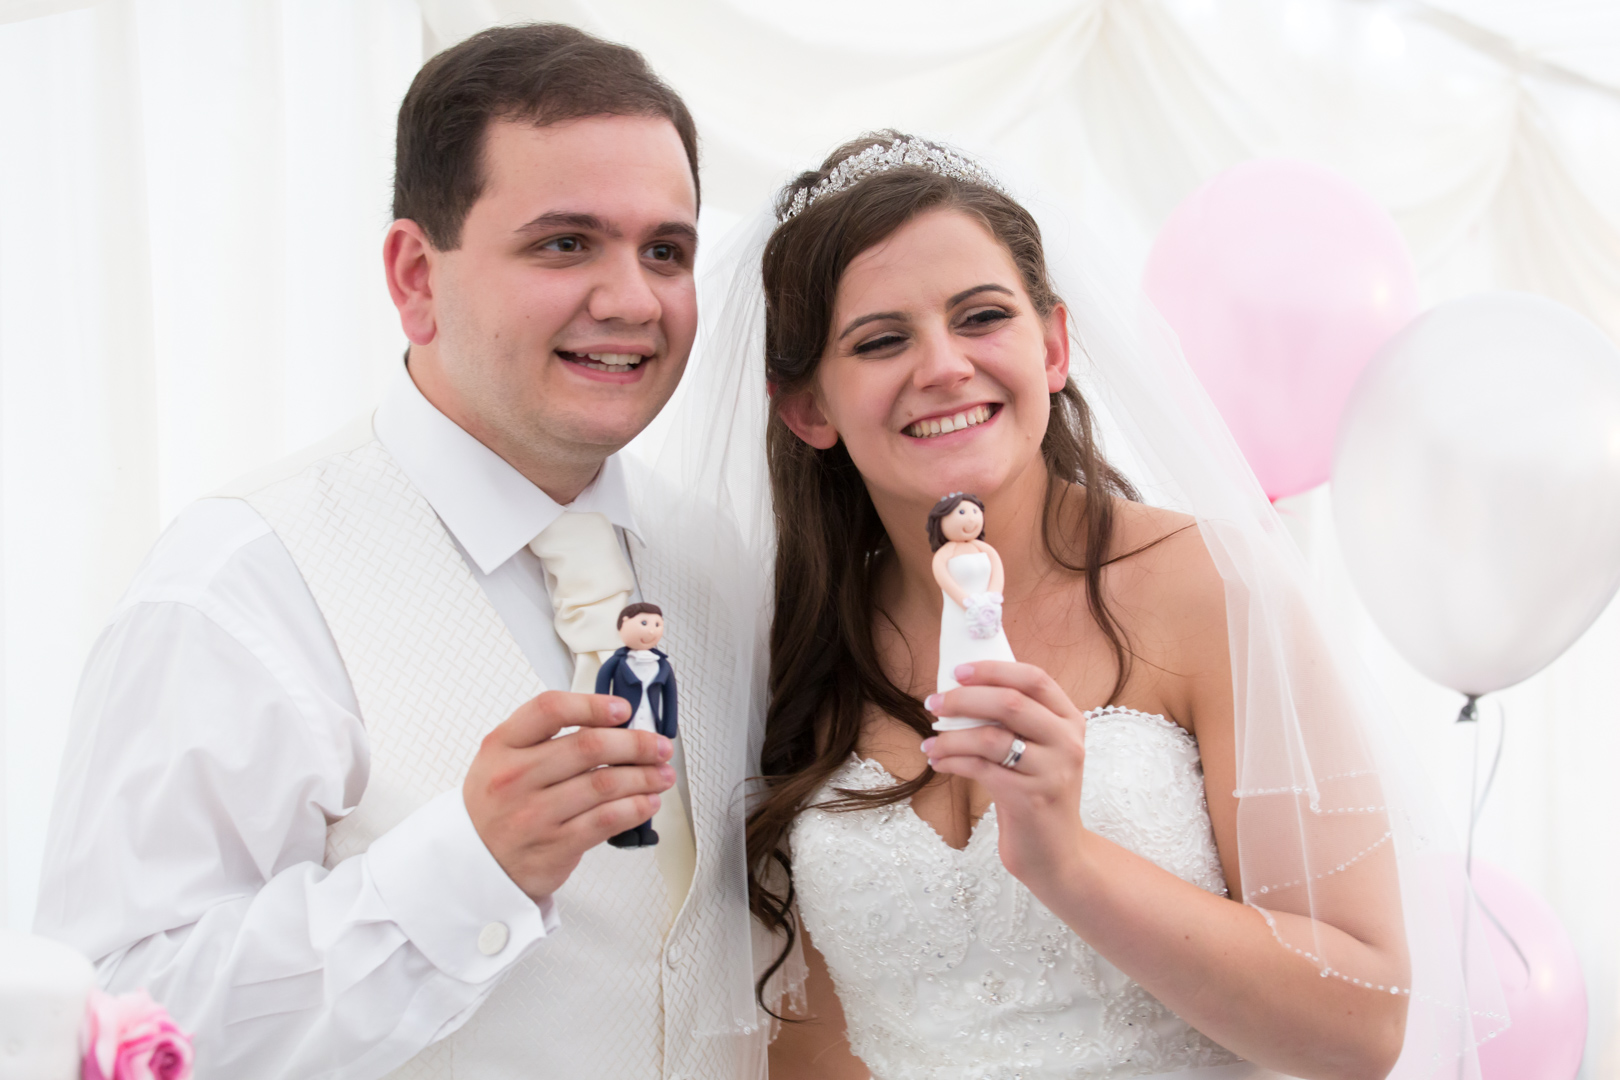 Naomi and Emilio photographed at The Grange in Northwood, Middlesex by Tim & Linda Durham of Pinner Wedding Photograph